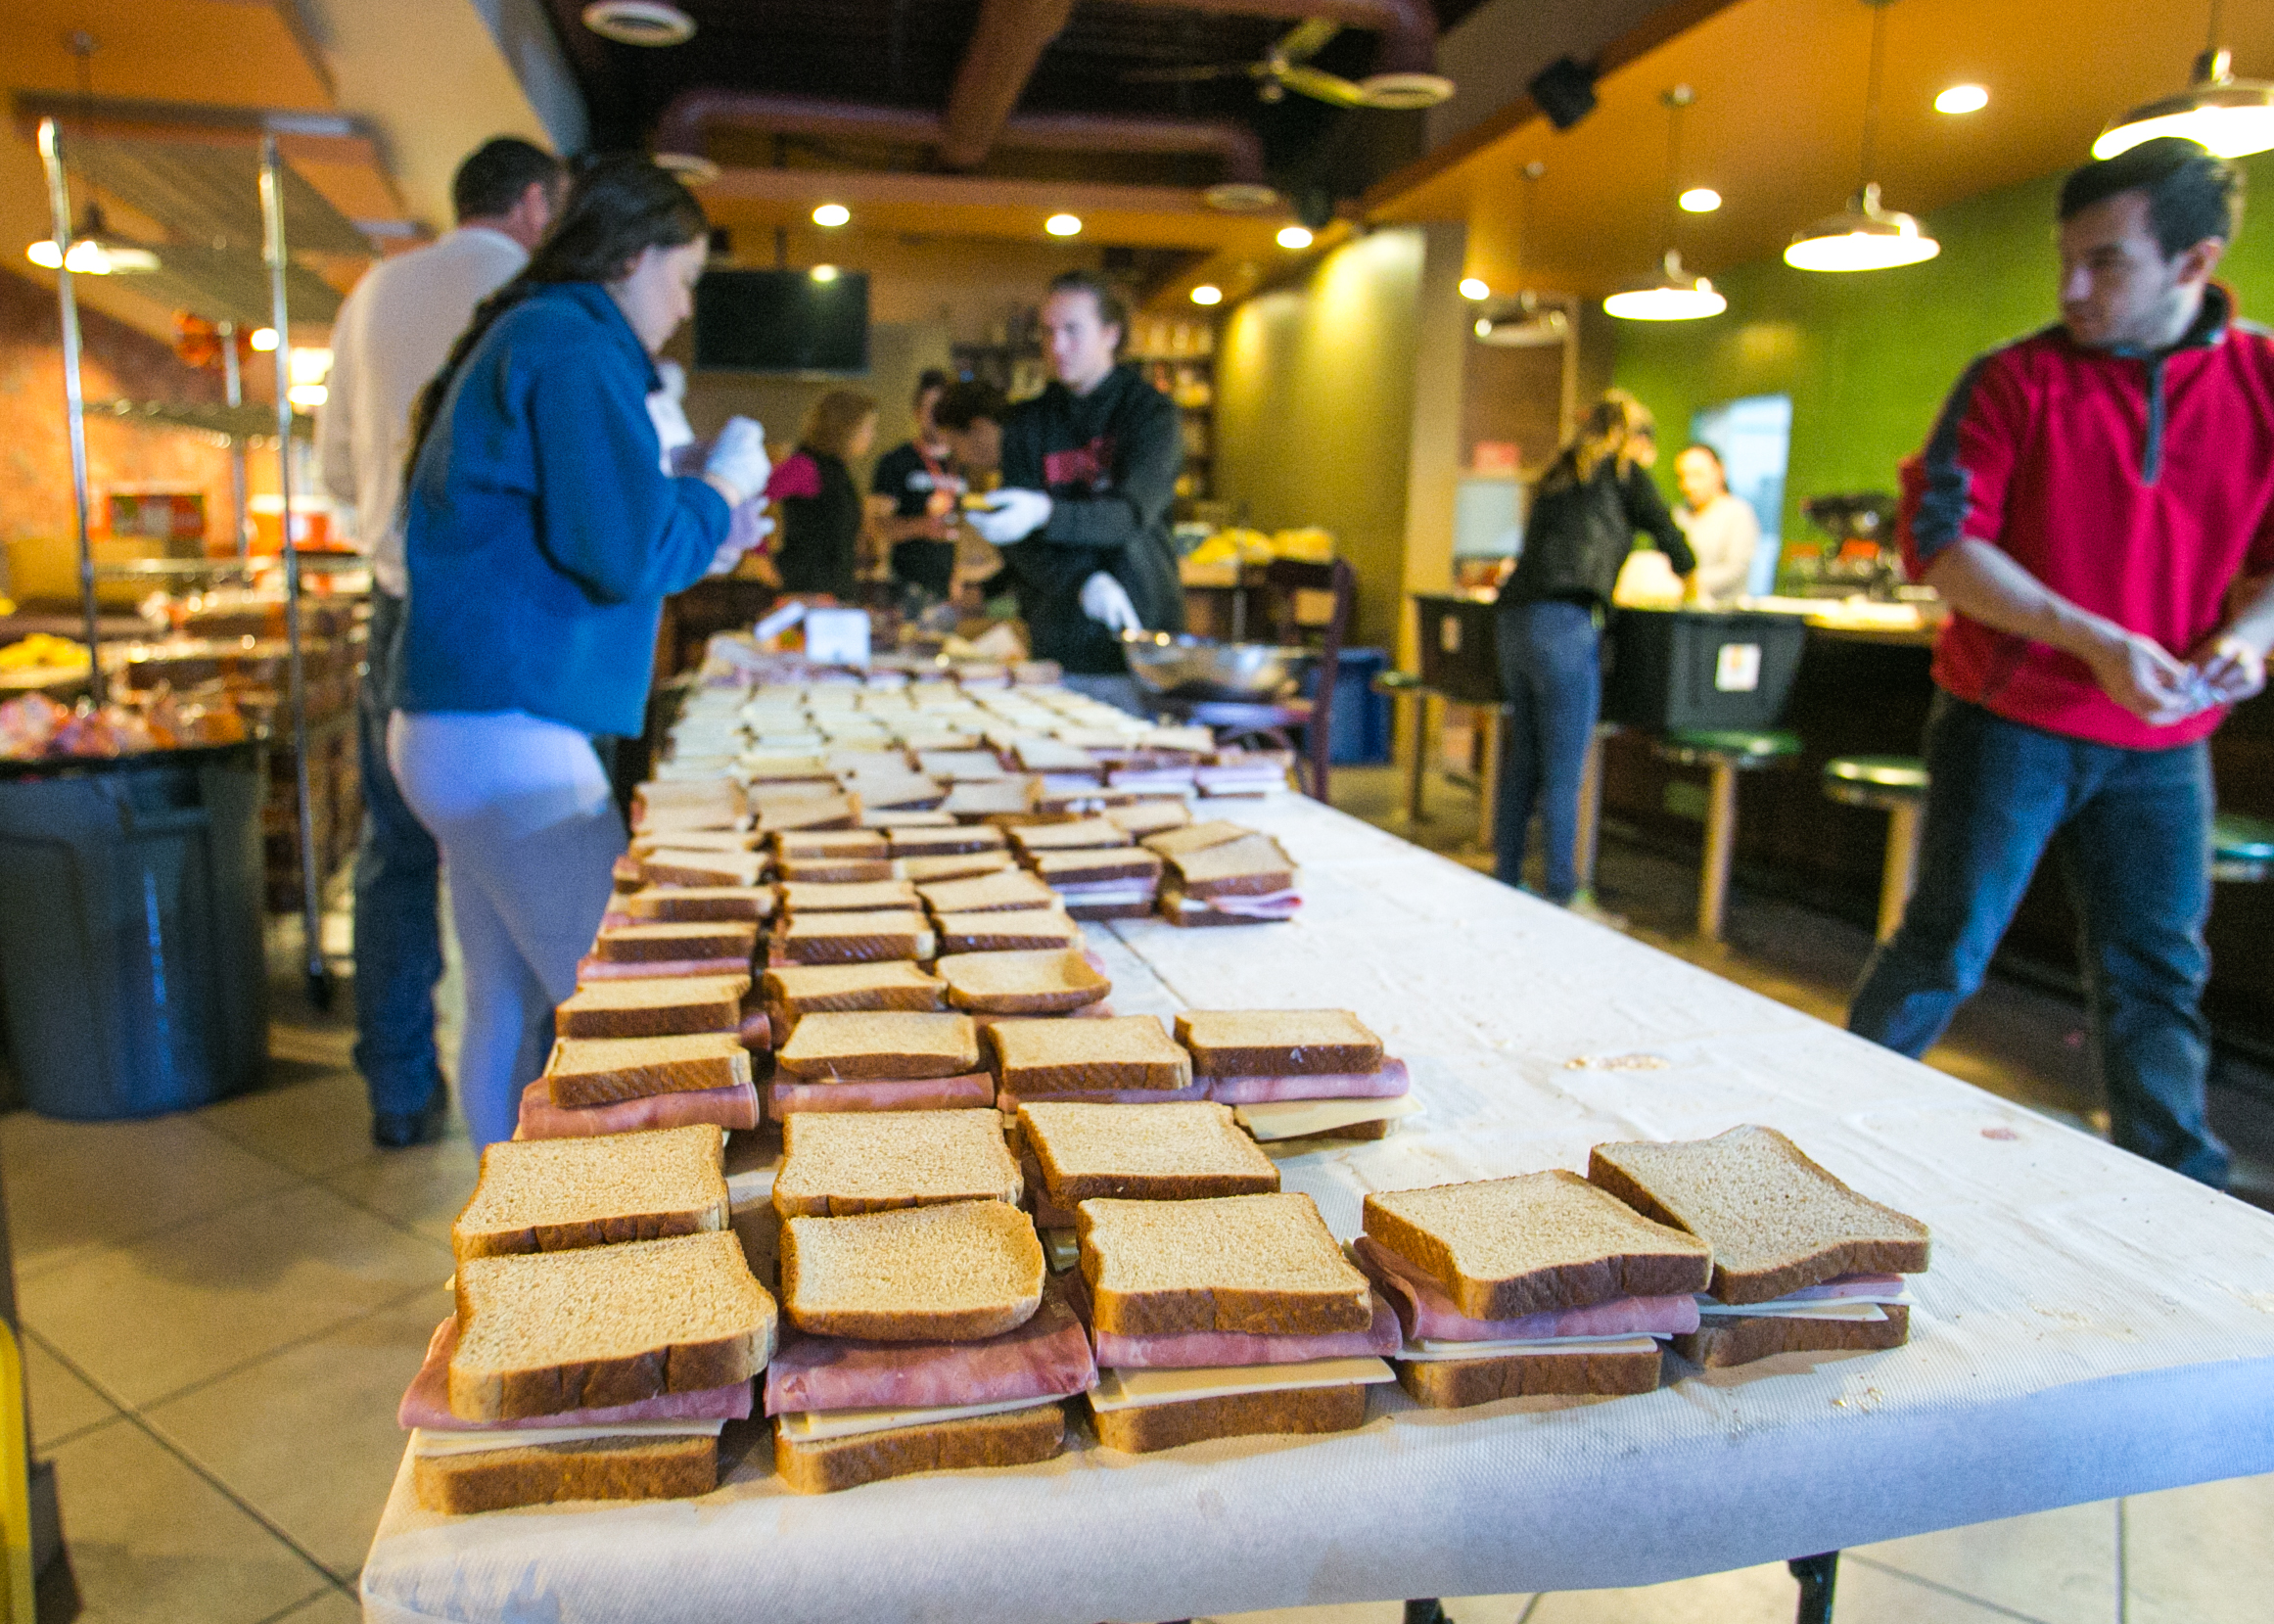  Over 1,200 sandwiches are prepped for lunch by World Central Kitchen volunteers. 